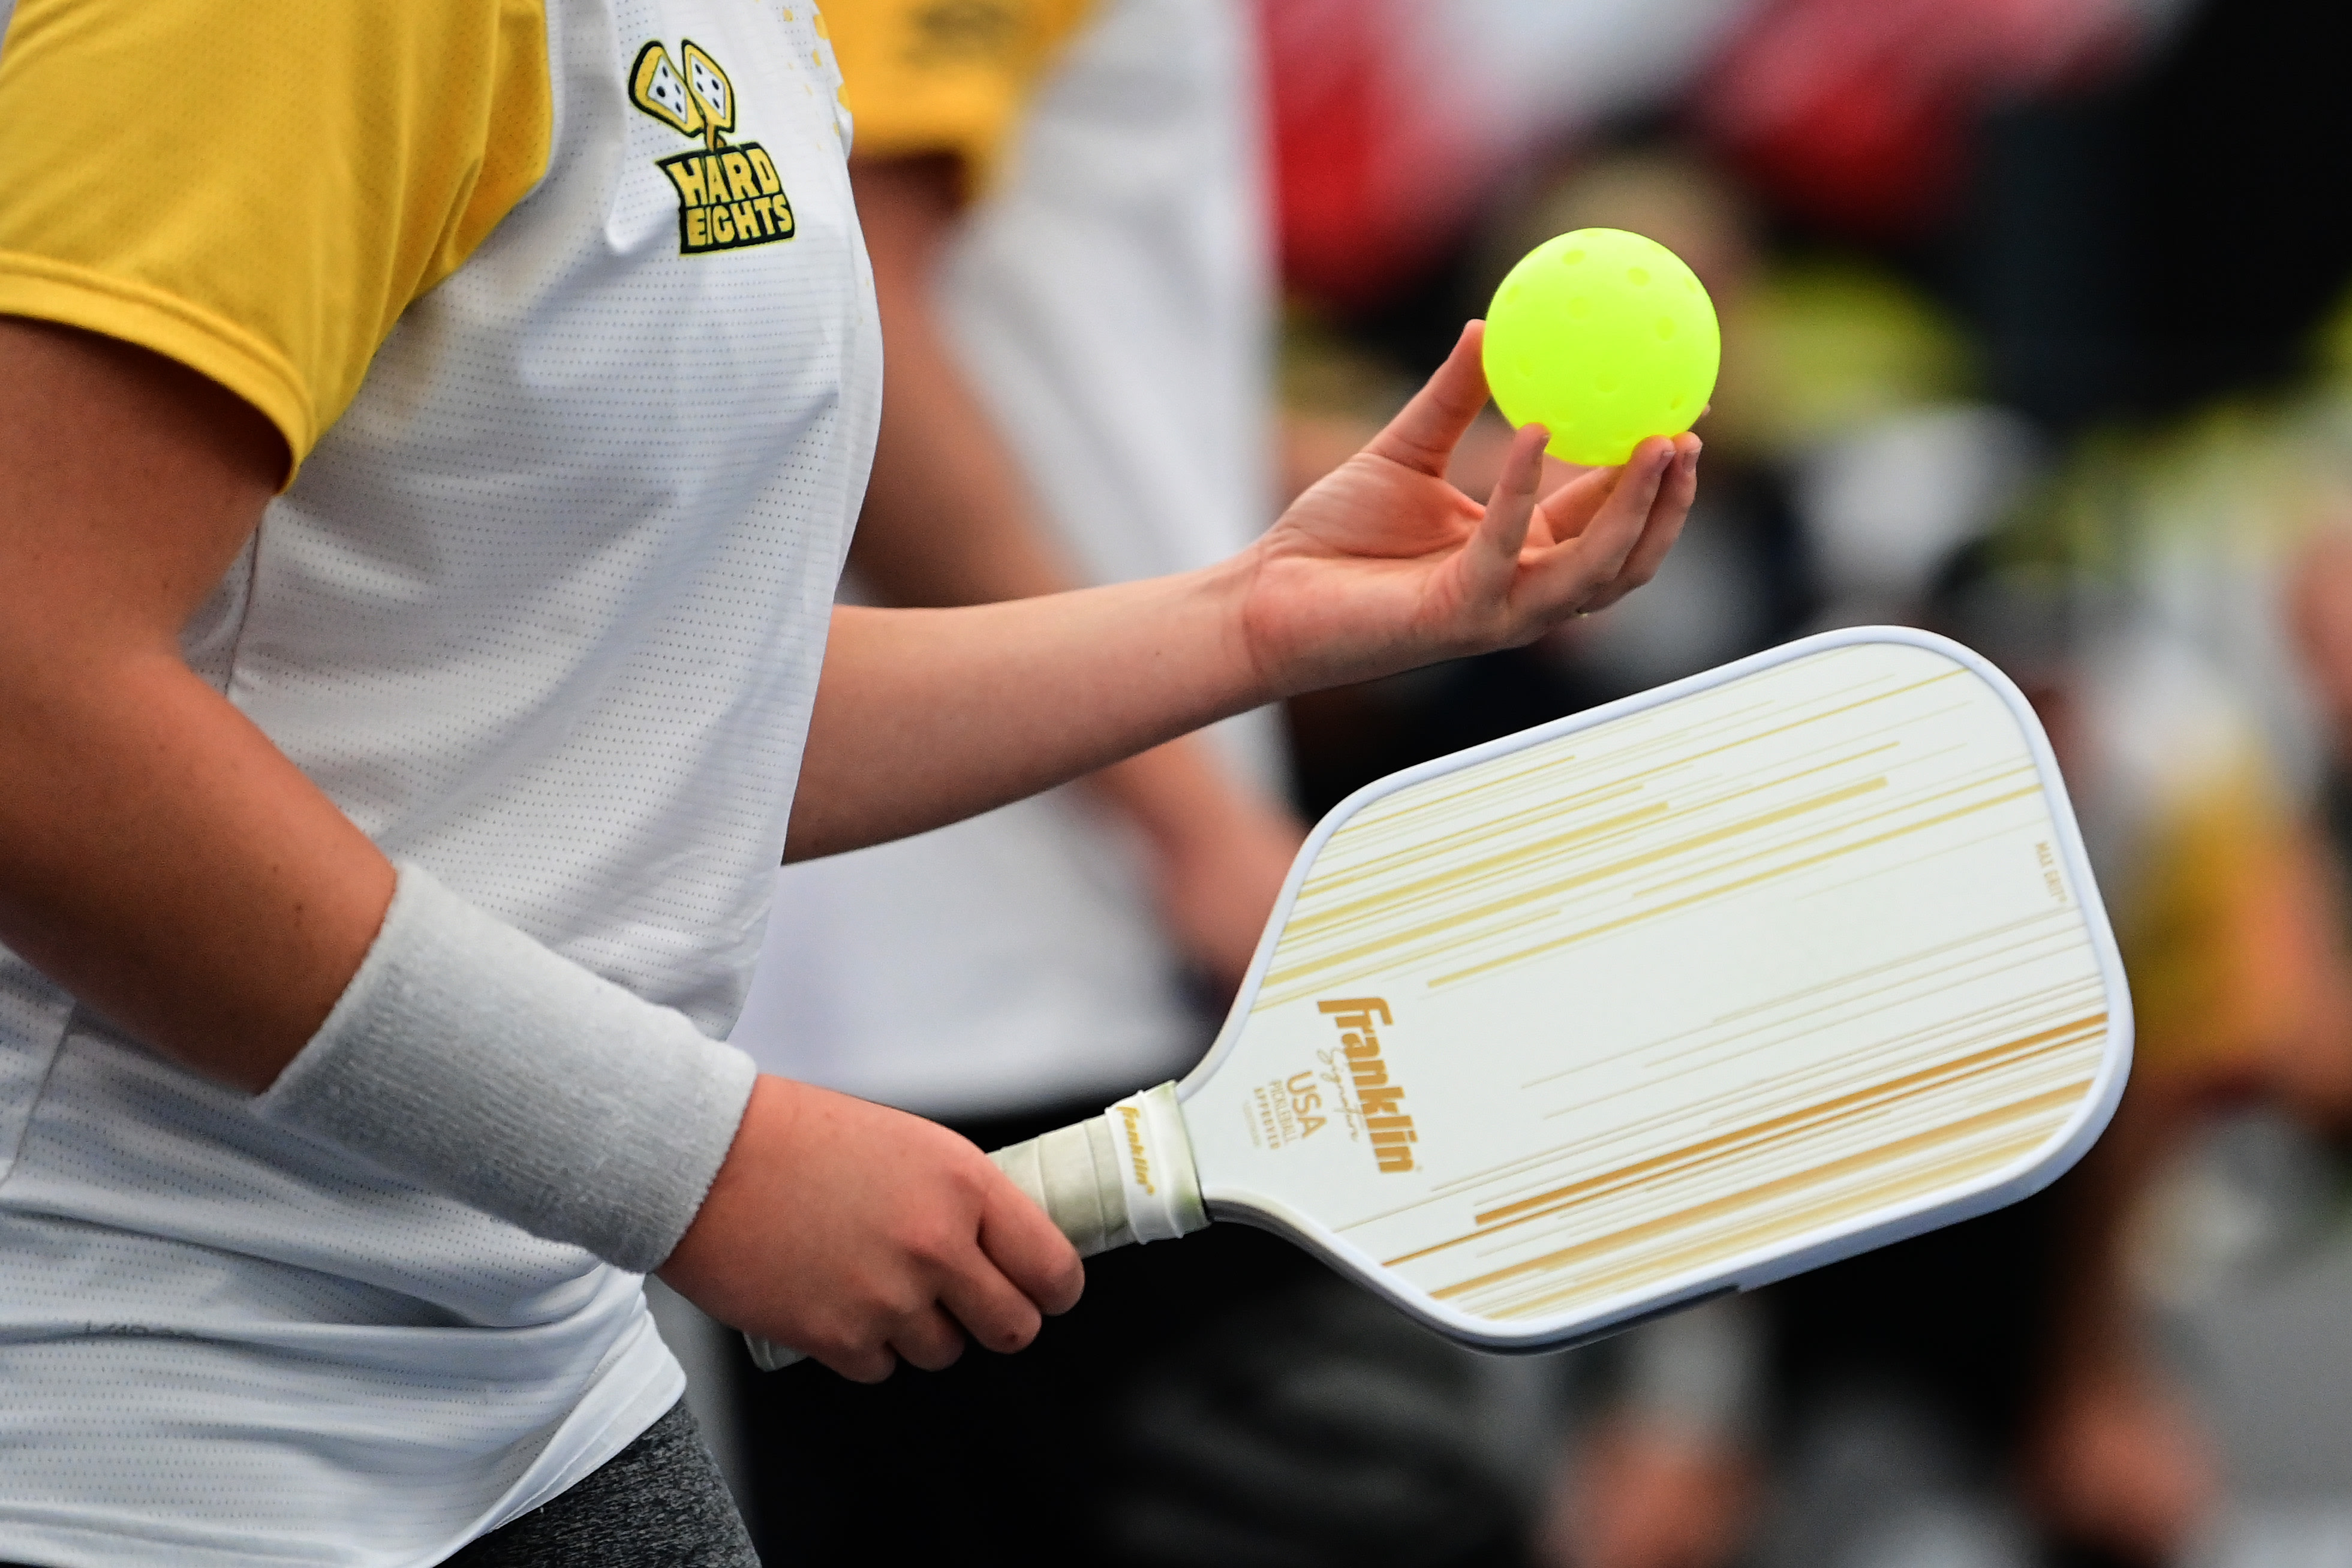 Universal Tennis expands into pickleball with new rating system, event management software